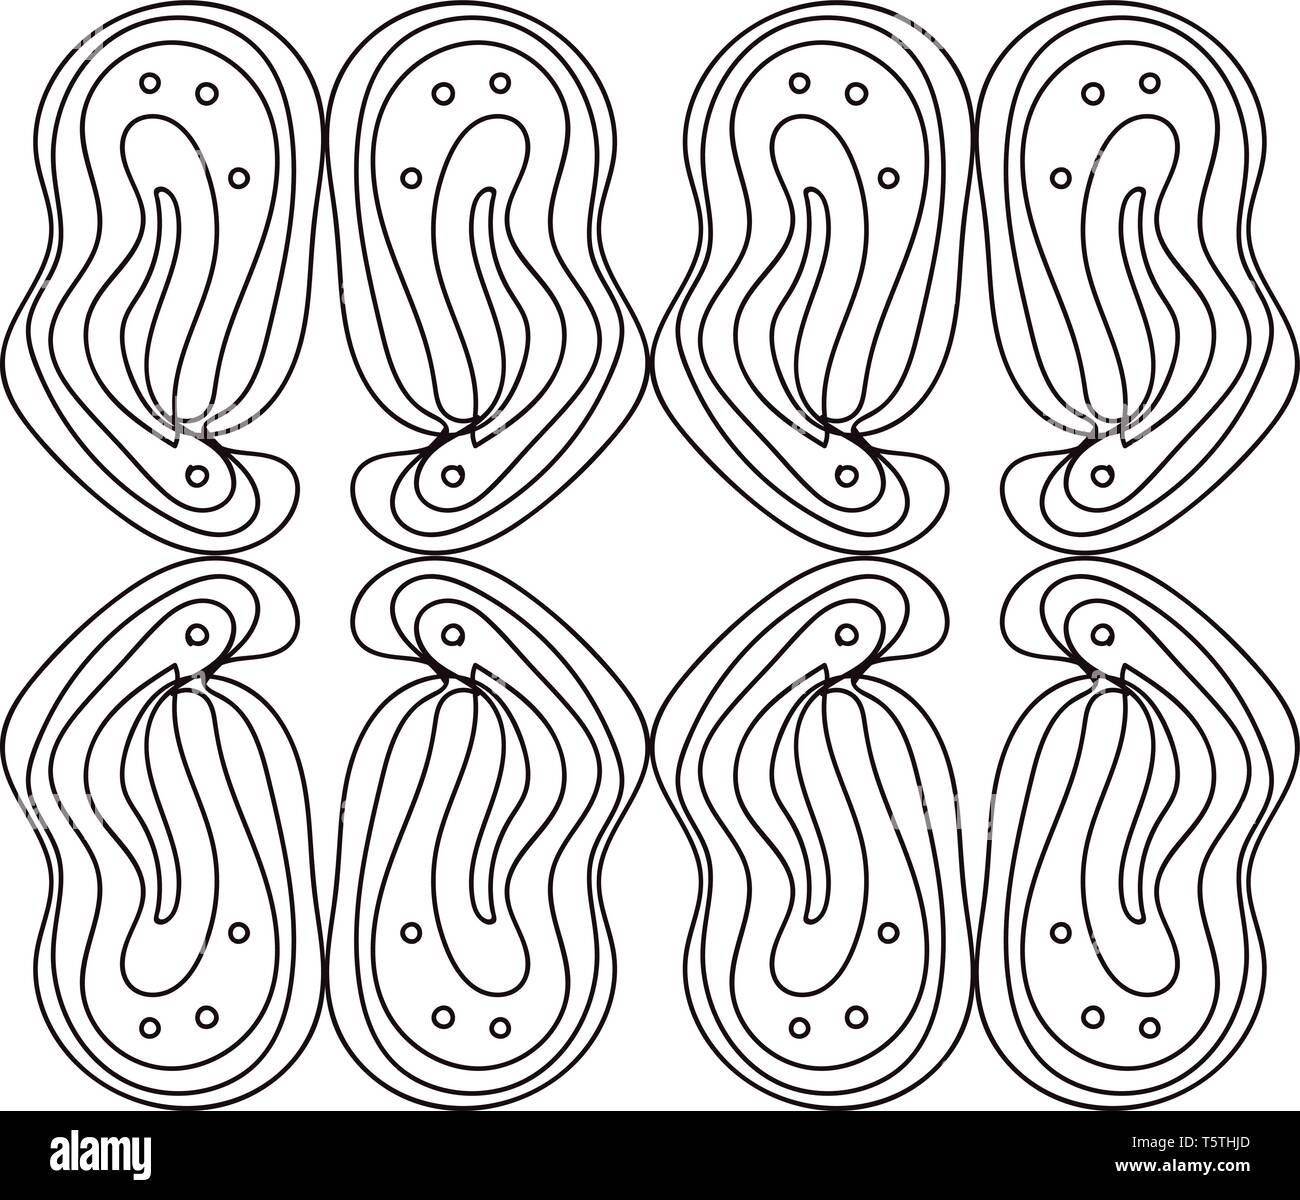 A drawing of four pair of curved lines arranged as mirror images vector color drawing or illustration Stock Vector